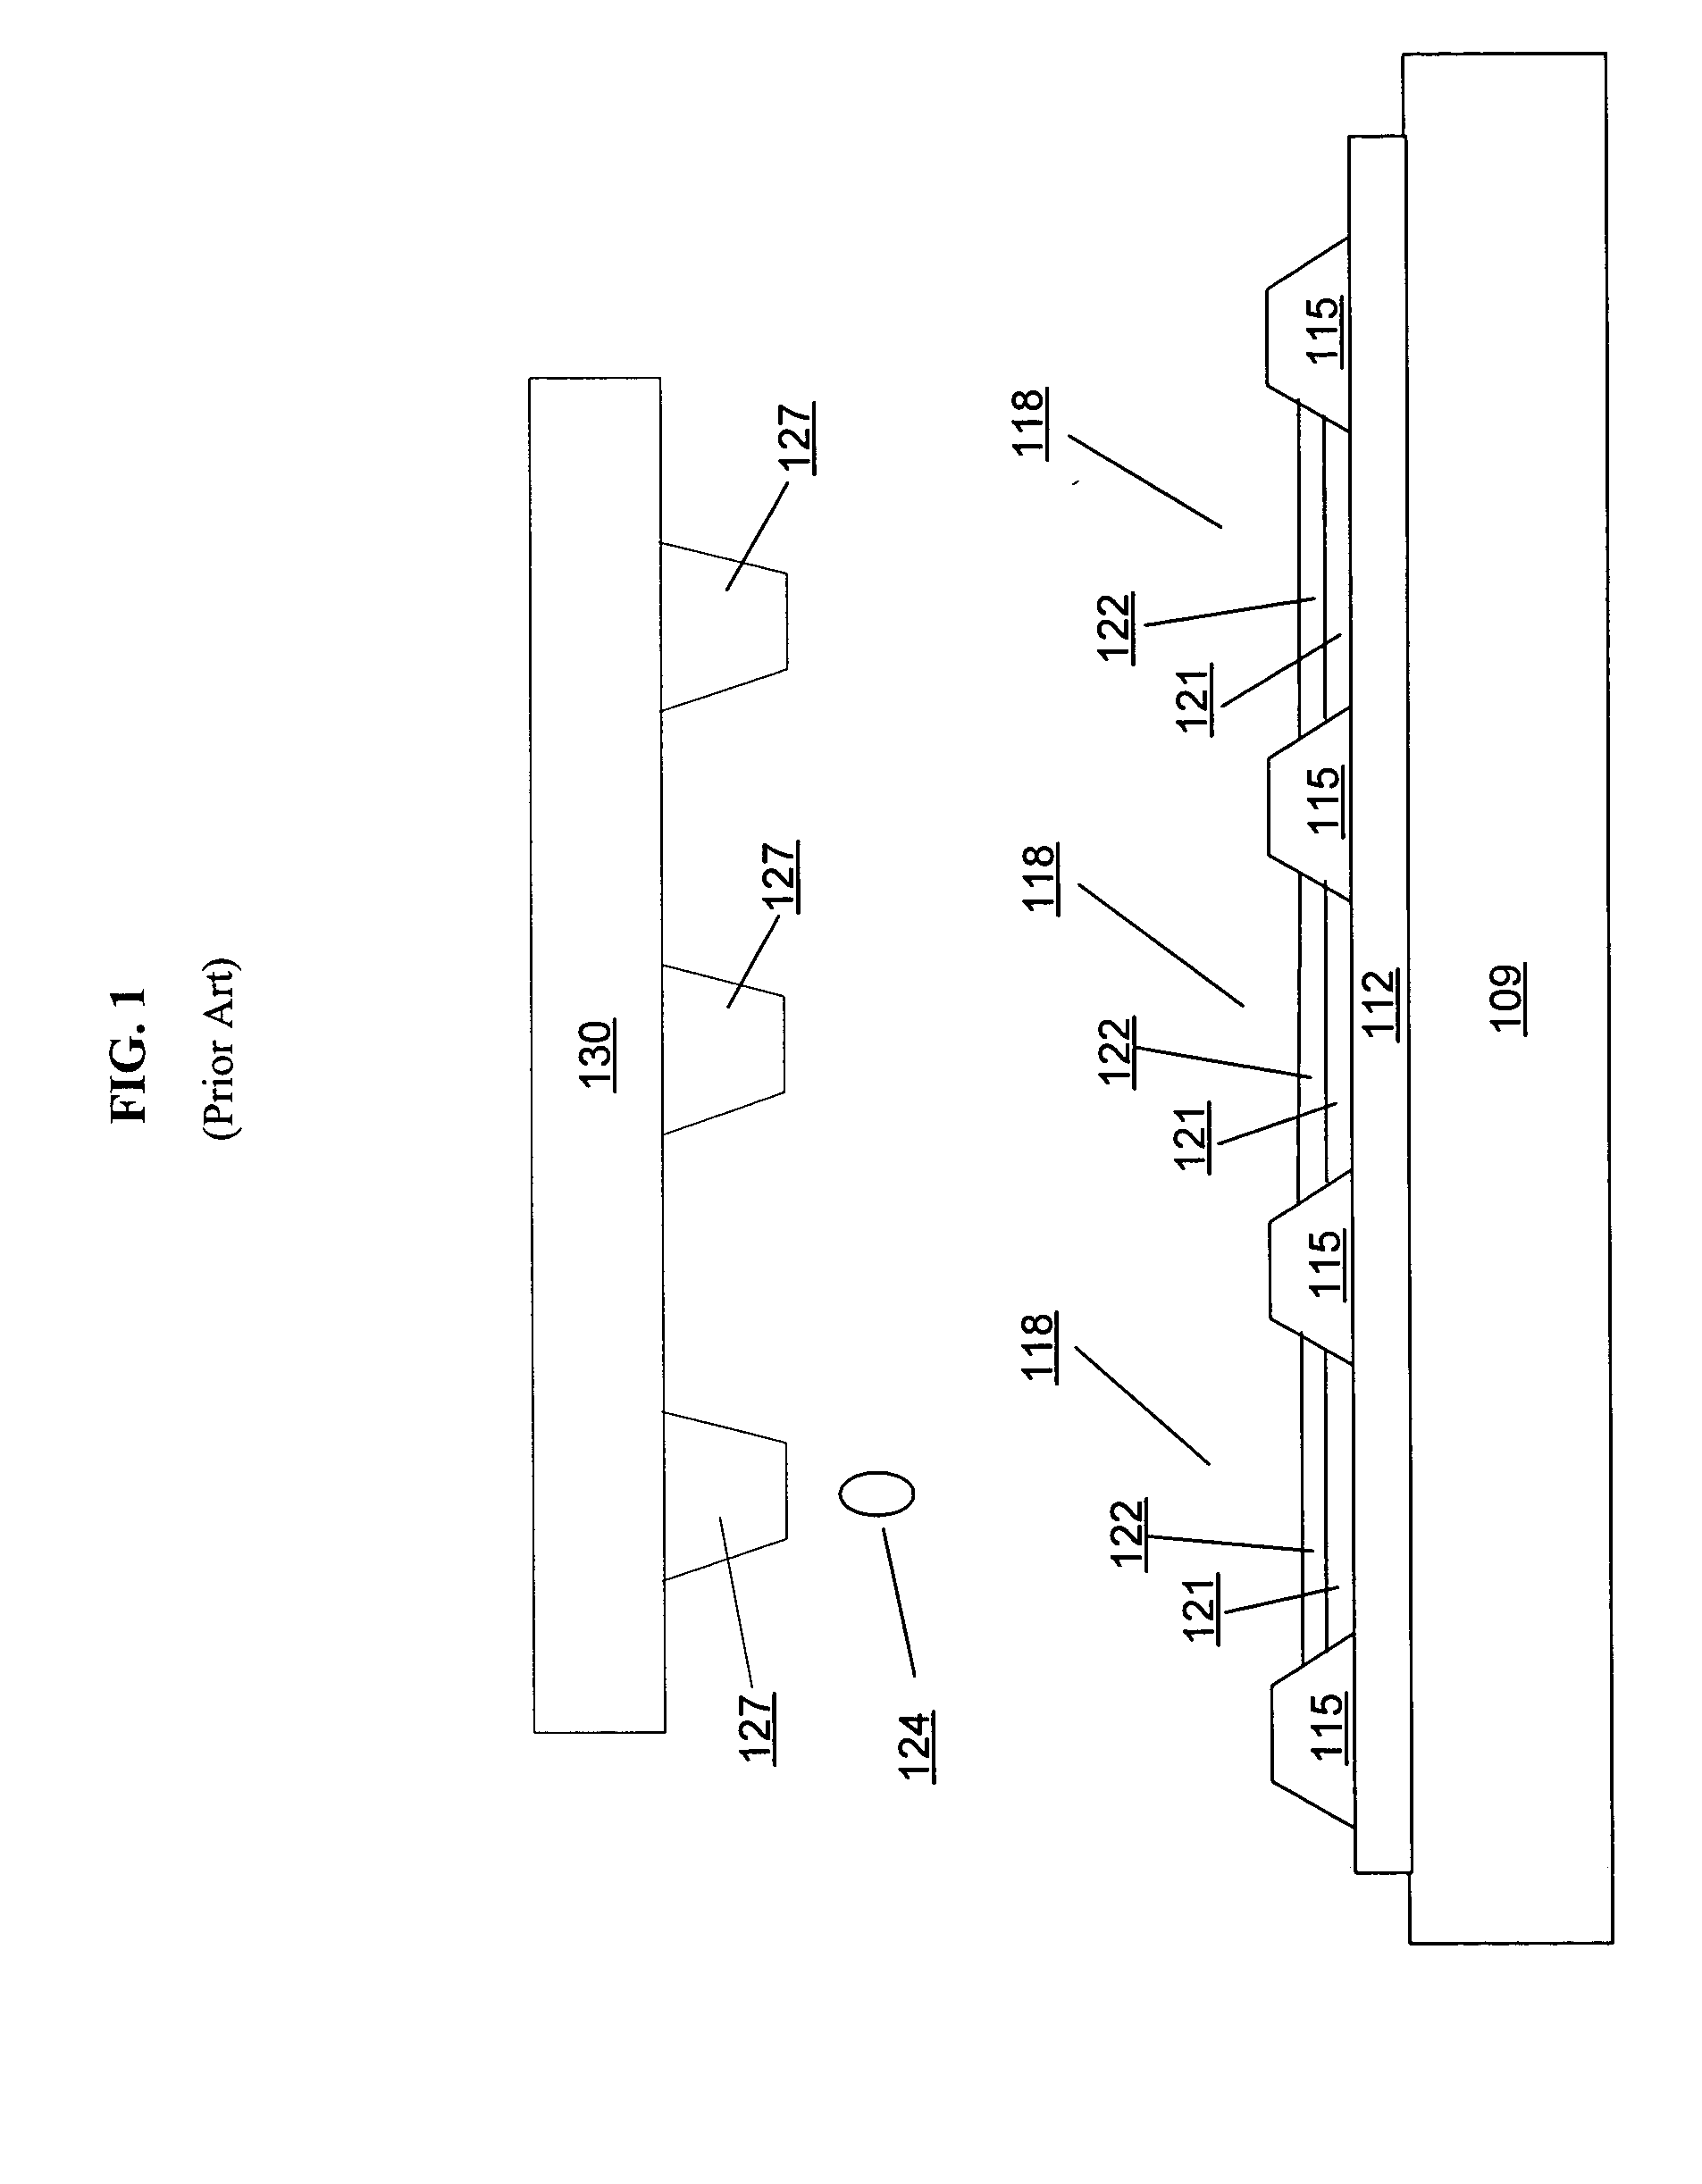 Solvent mixtures for an organic electronic device